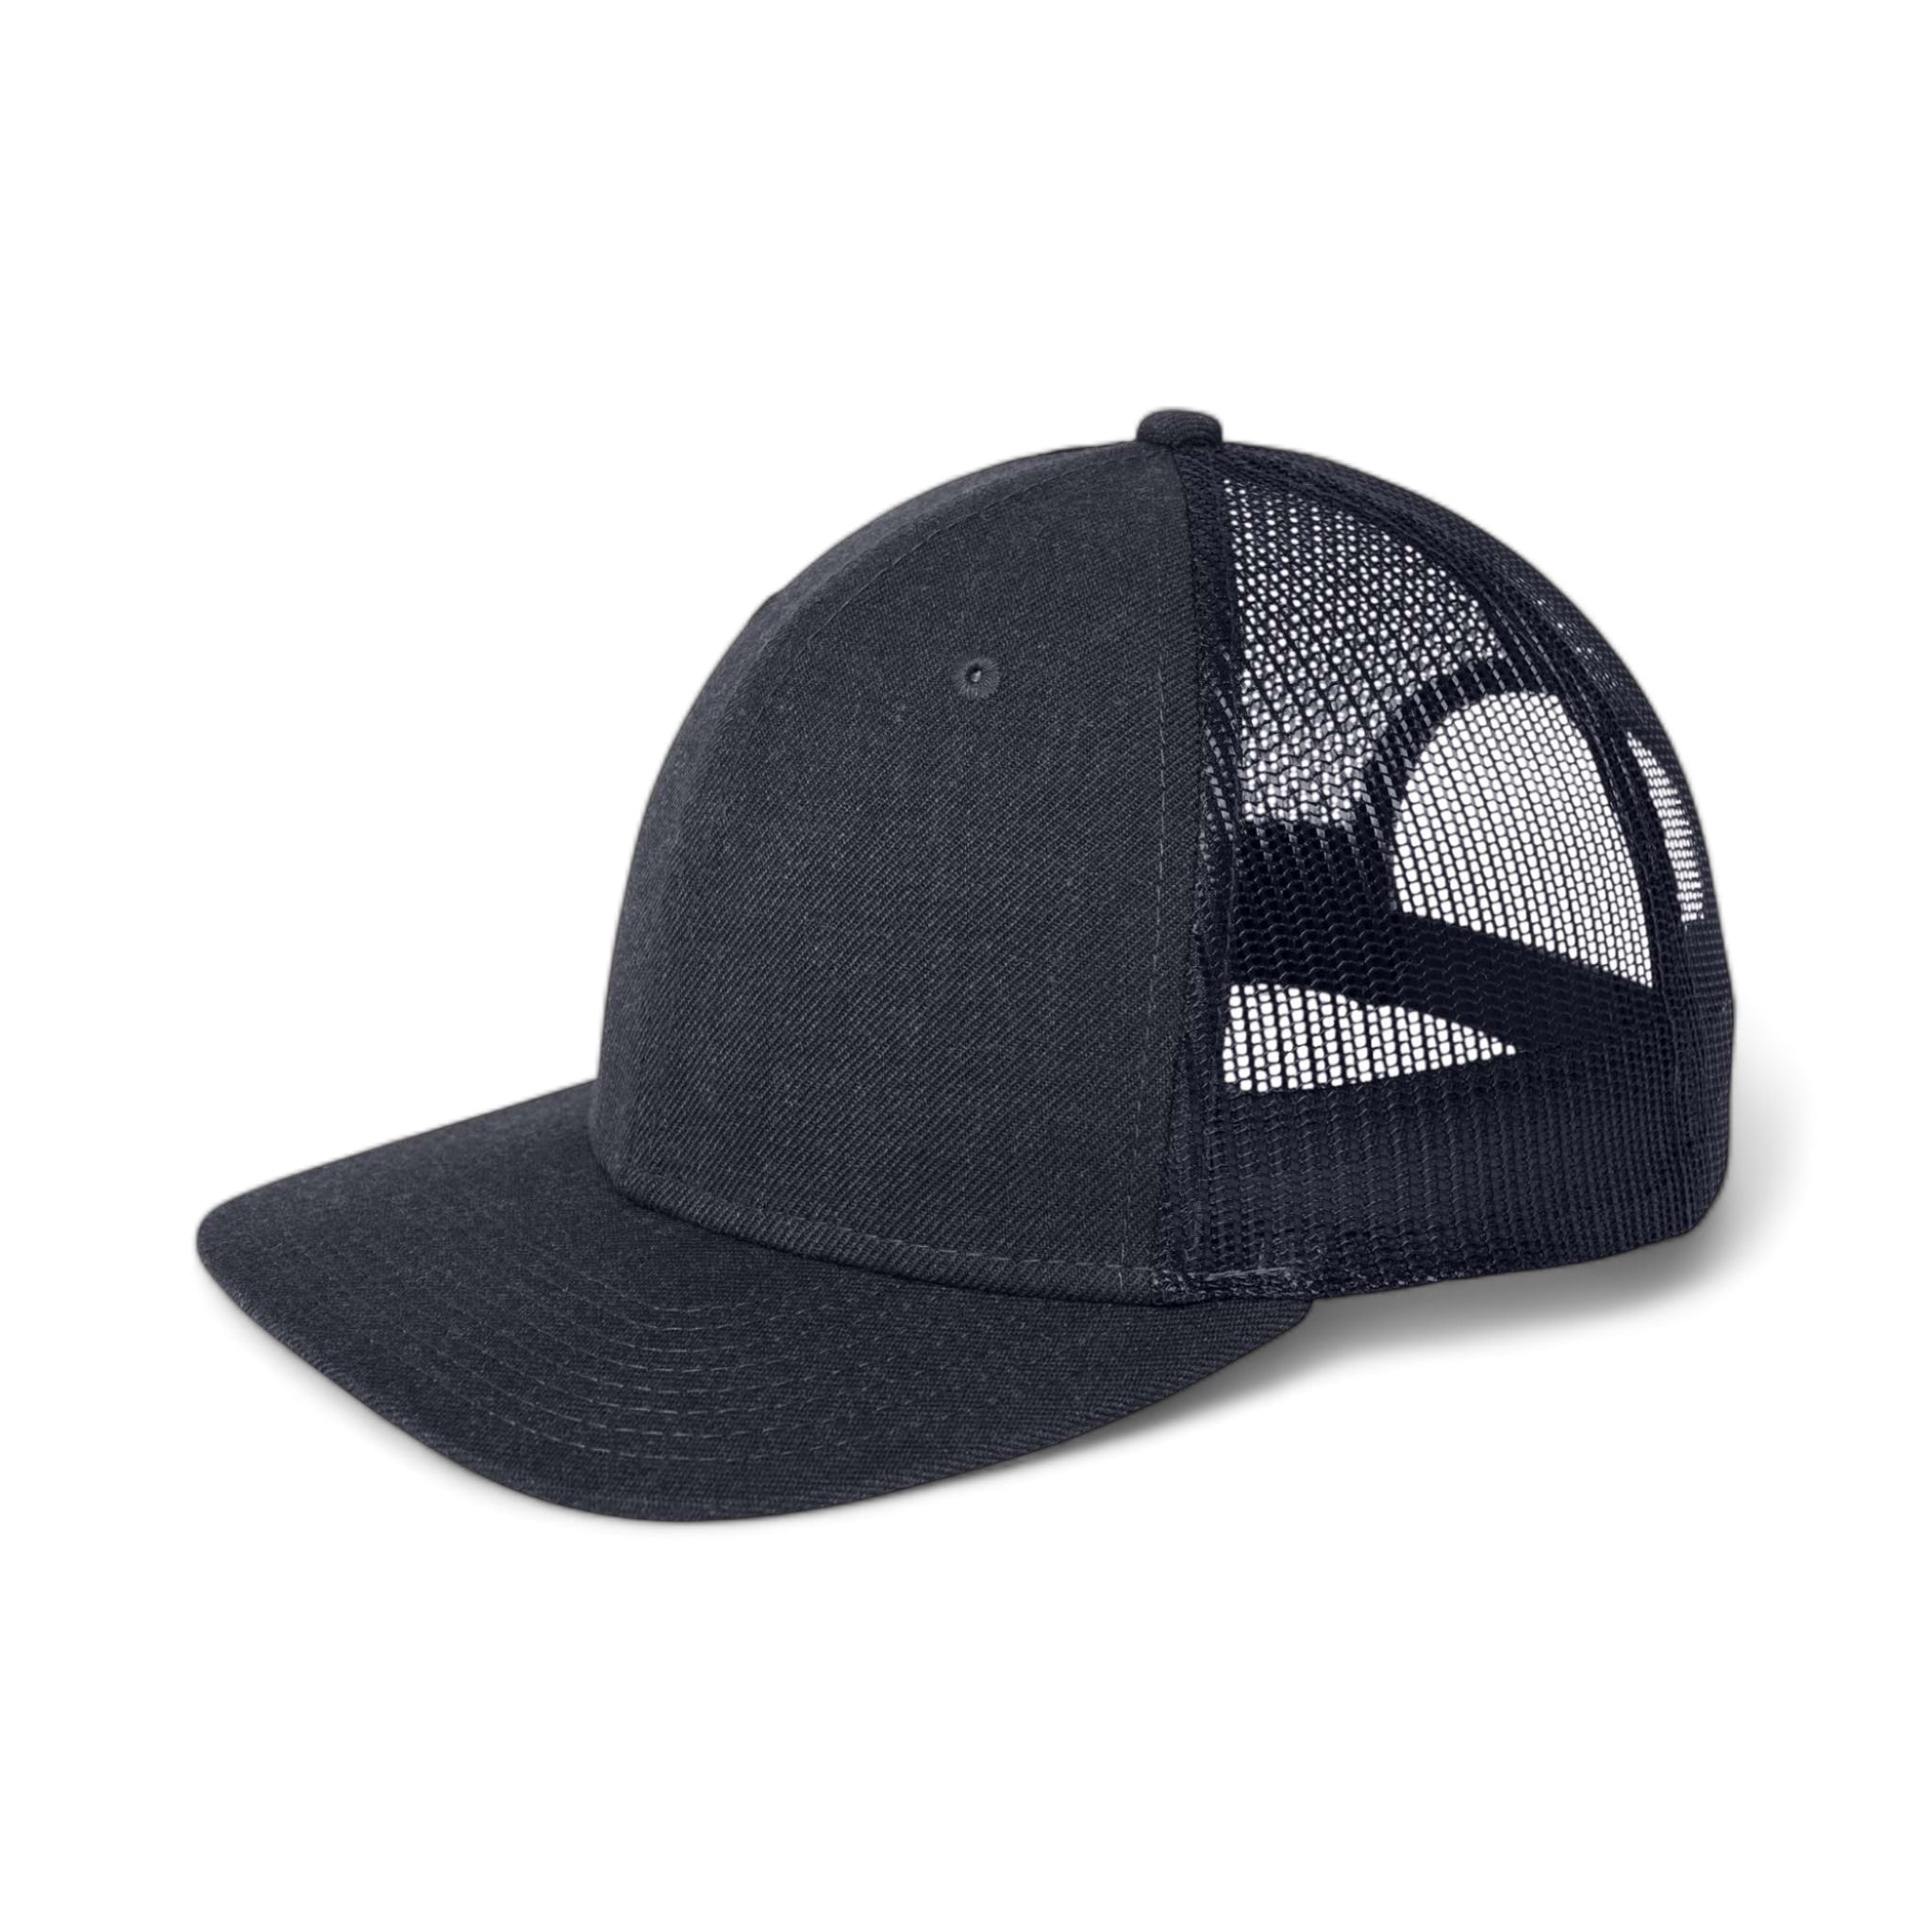 Side view of New Era NE207 custom hat in heather navy and navy